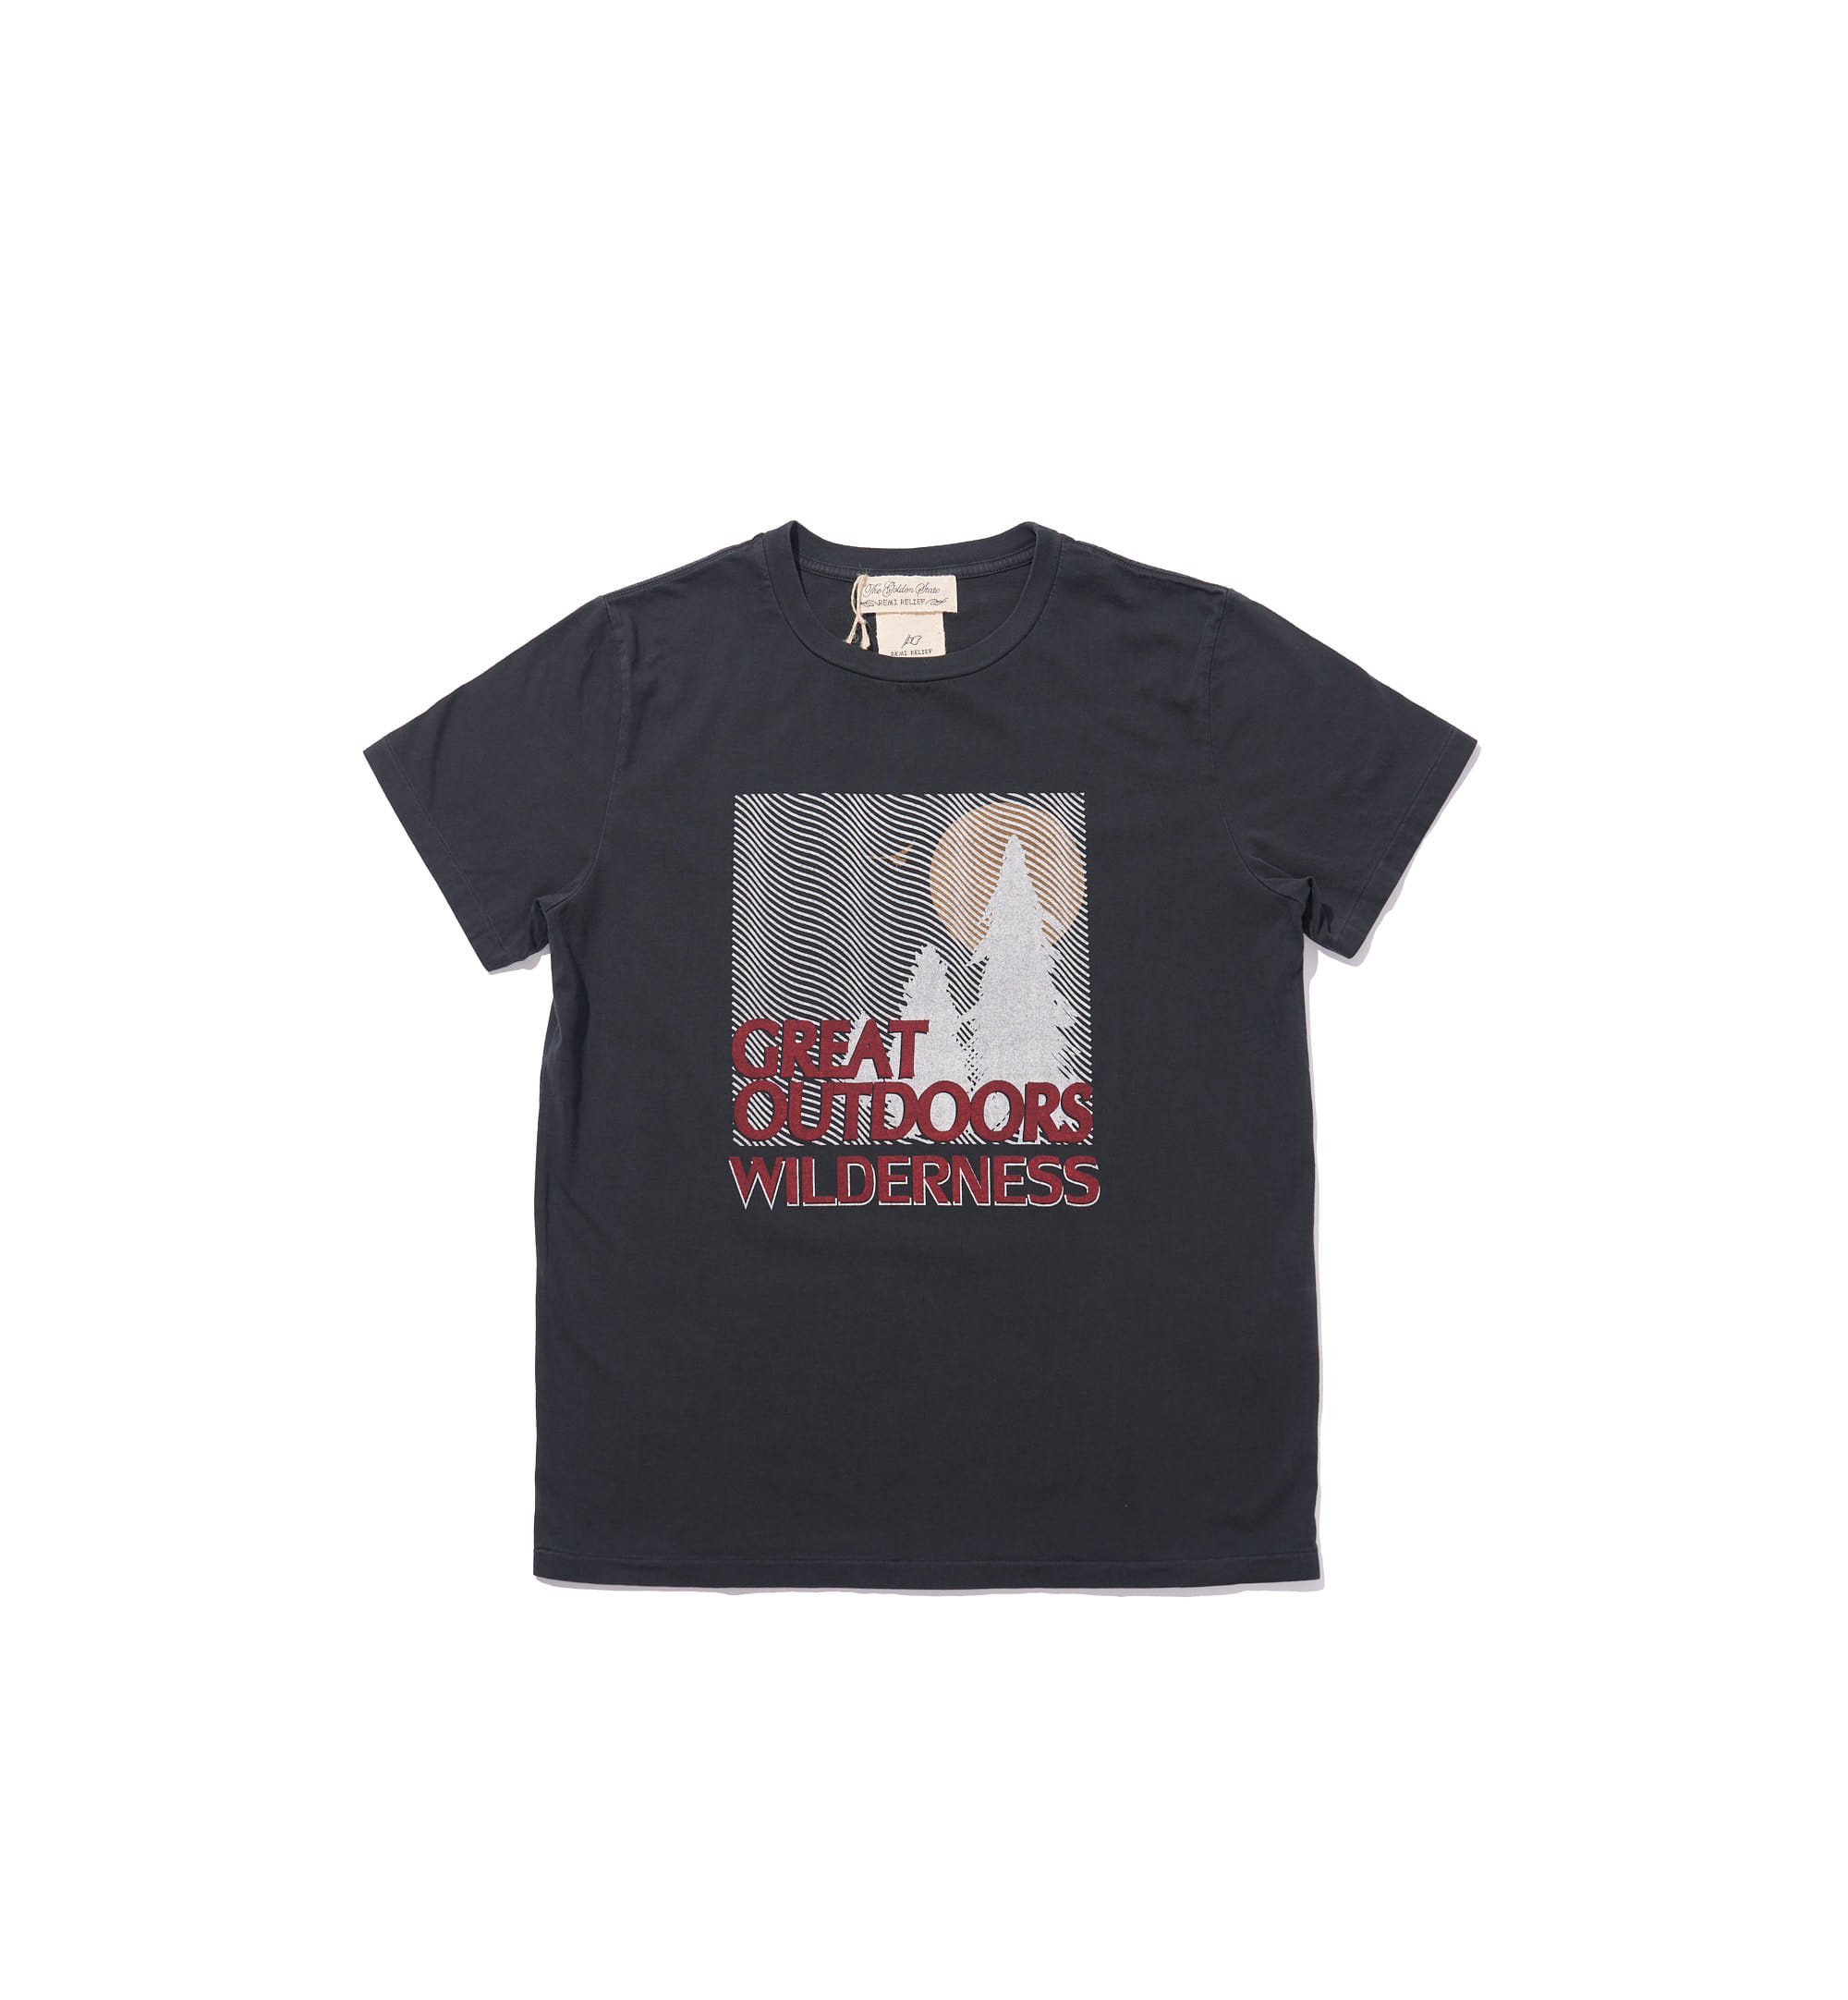 Low Wash Finish Print T-Shirt Black (Great Outdoors Wilderness)